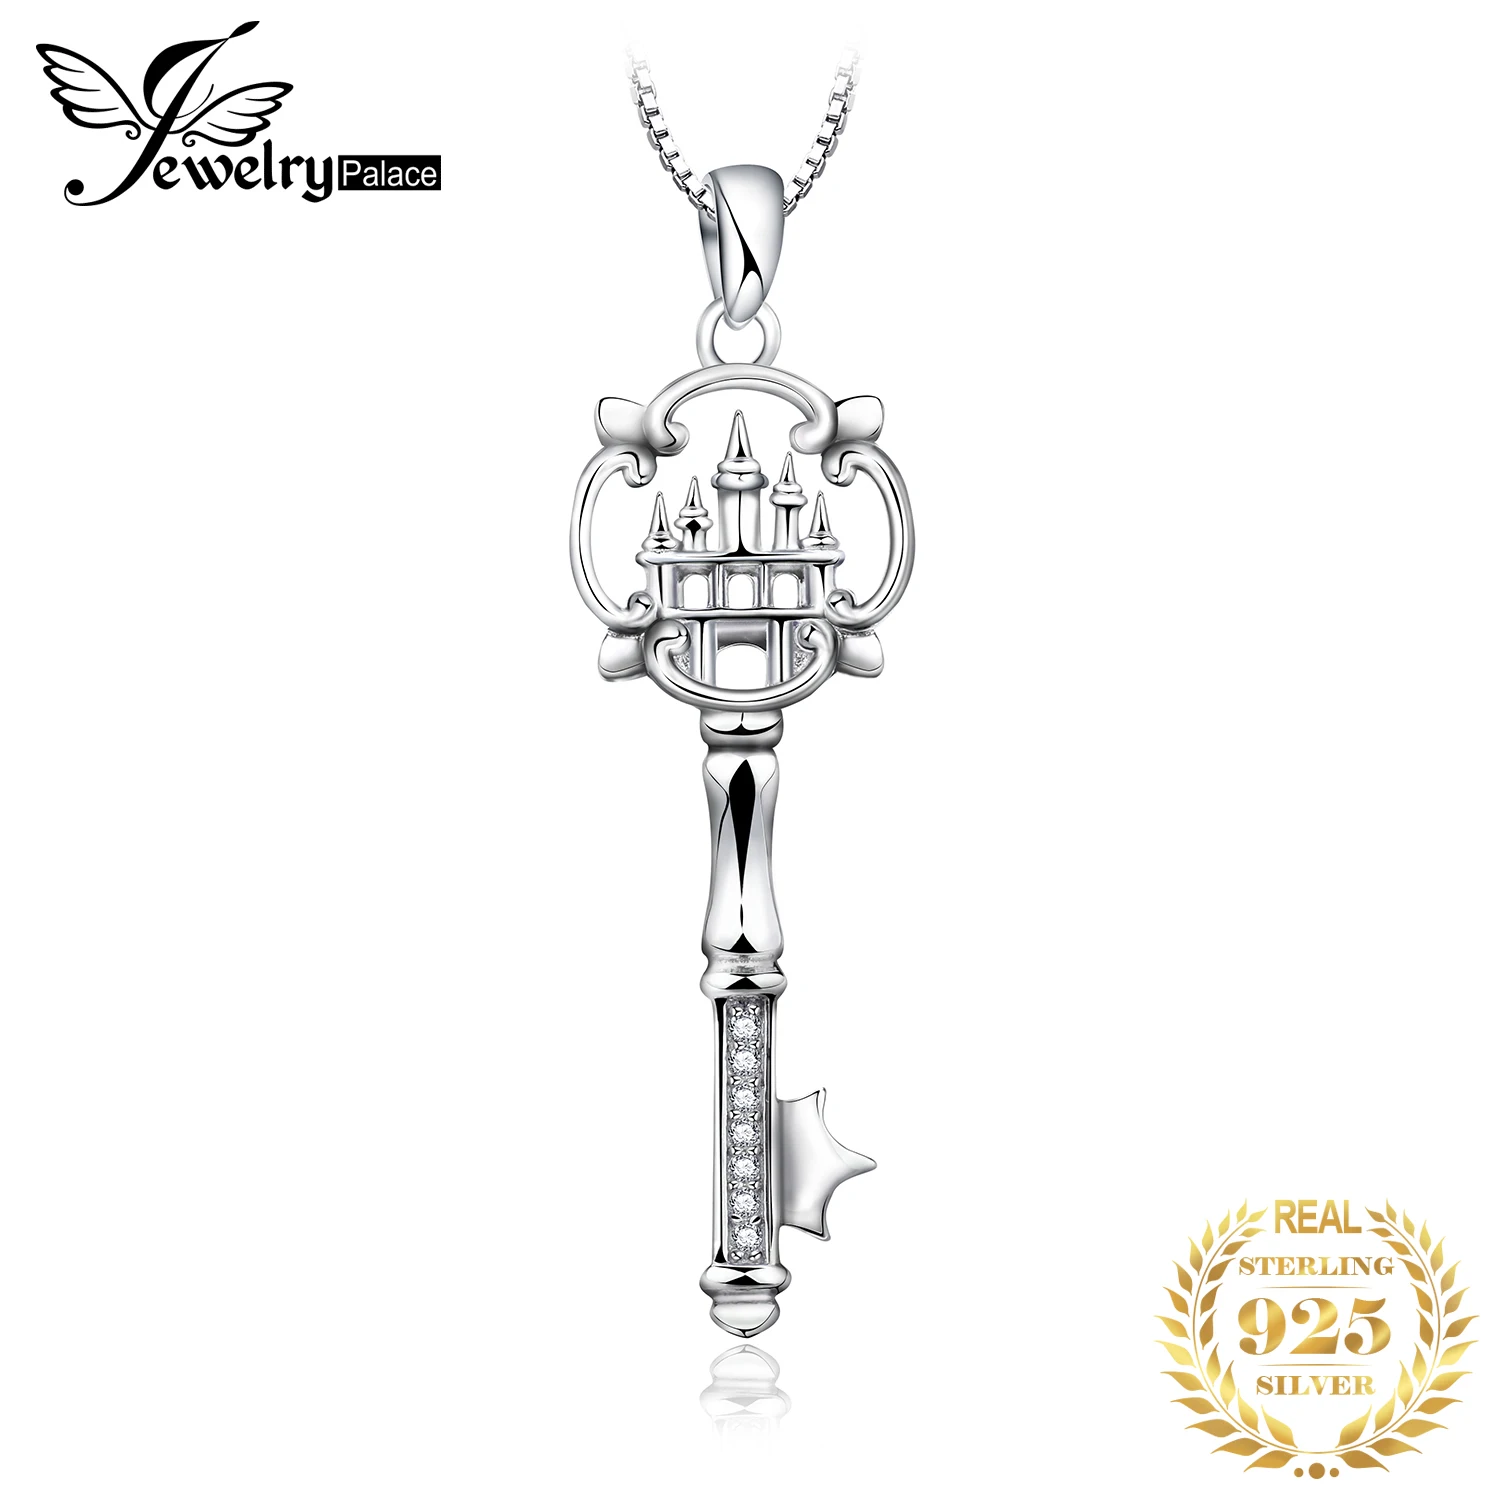 

JewelryPalace Castle Key Crown 925 Sterling Silver Pendant Necklace Cubic Zirconia Simulated Diamond Pendant for Women No Chain